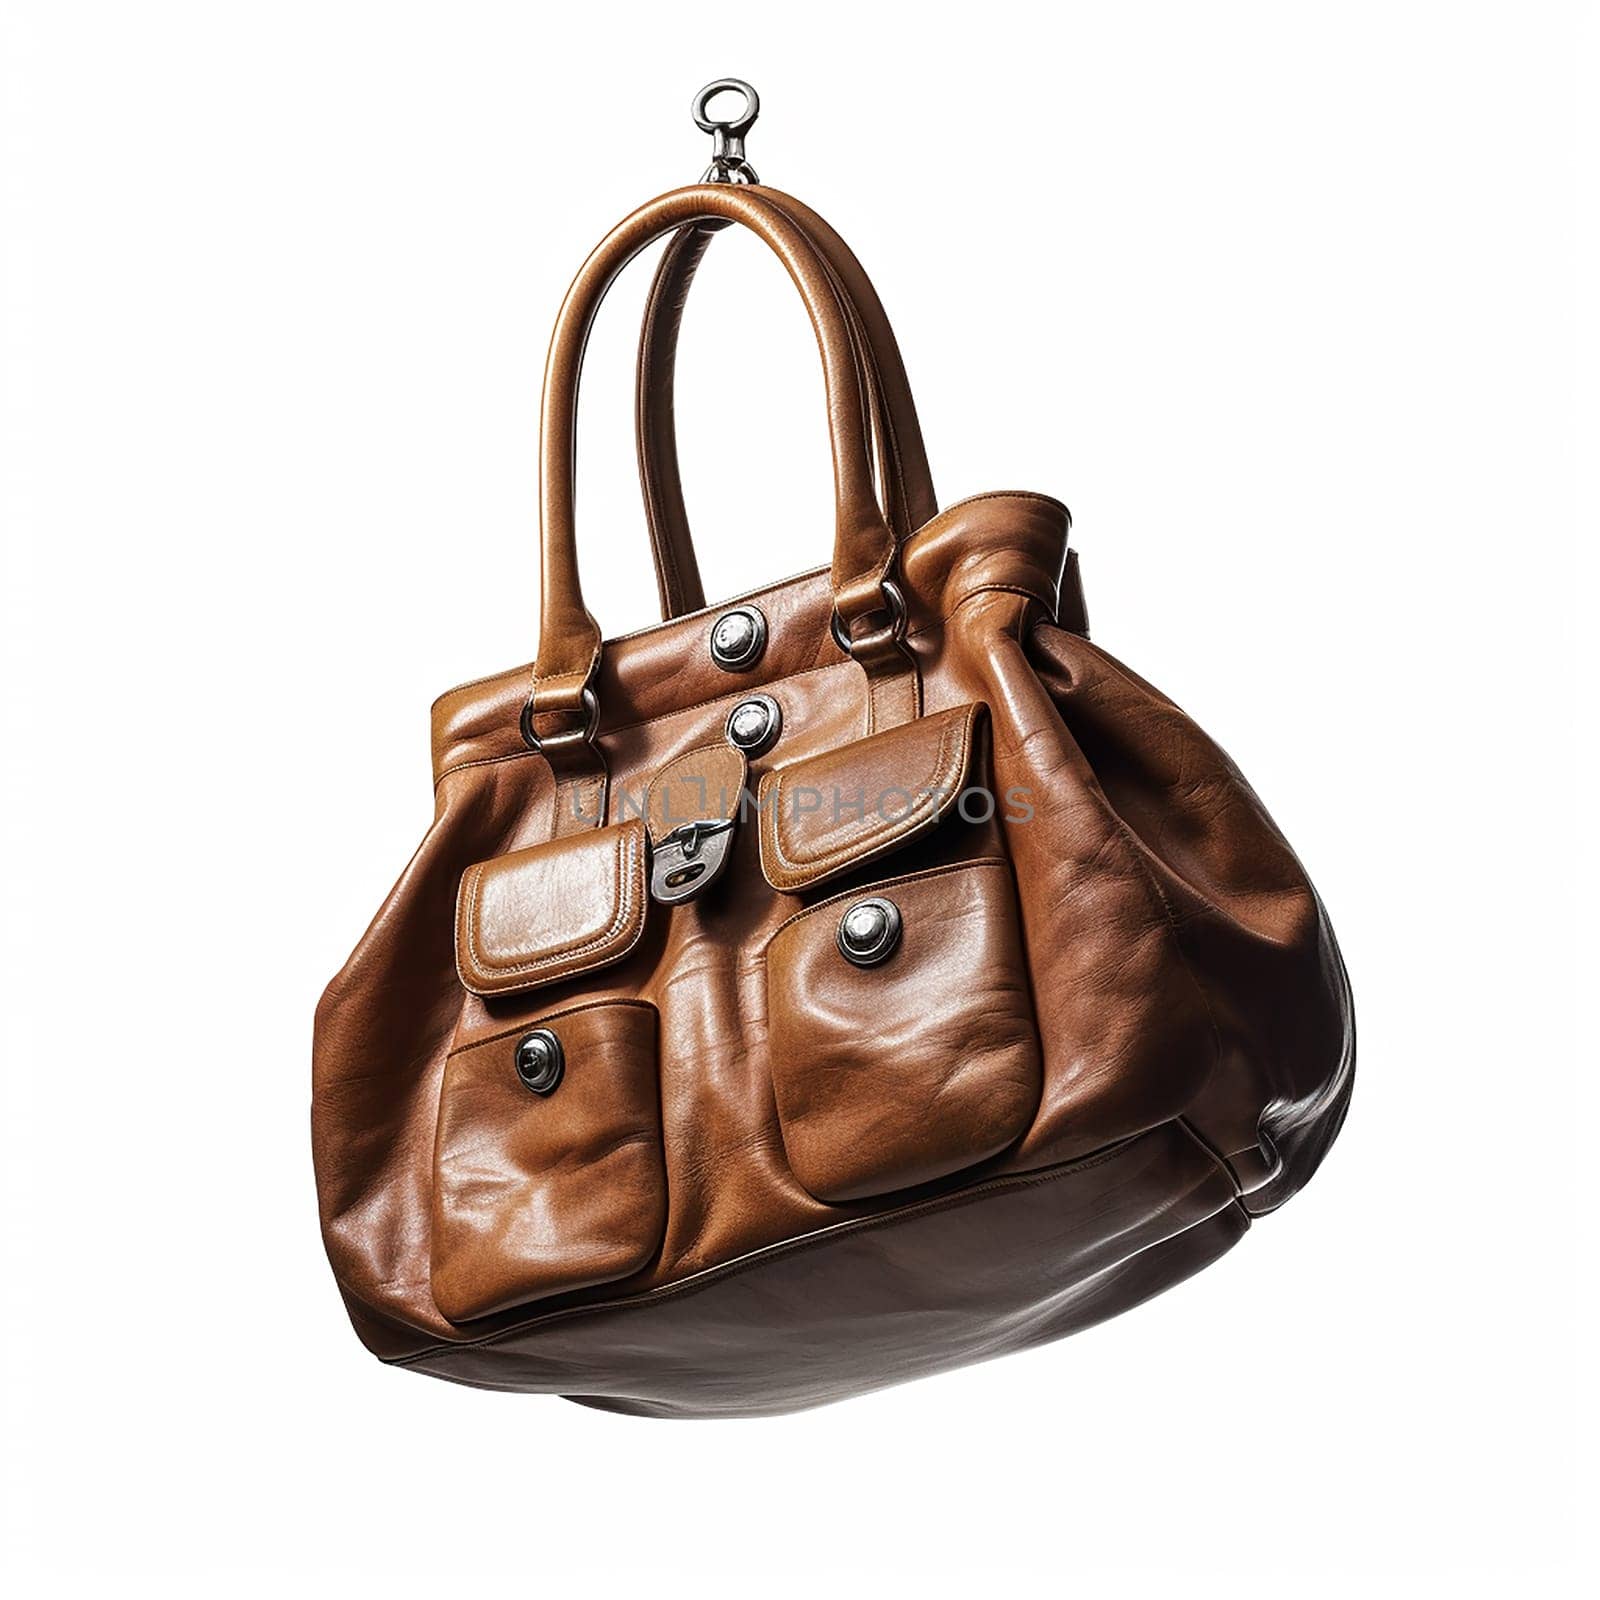 Elegant brown leather handbag with multiple pockets and silver accents.